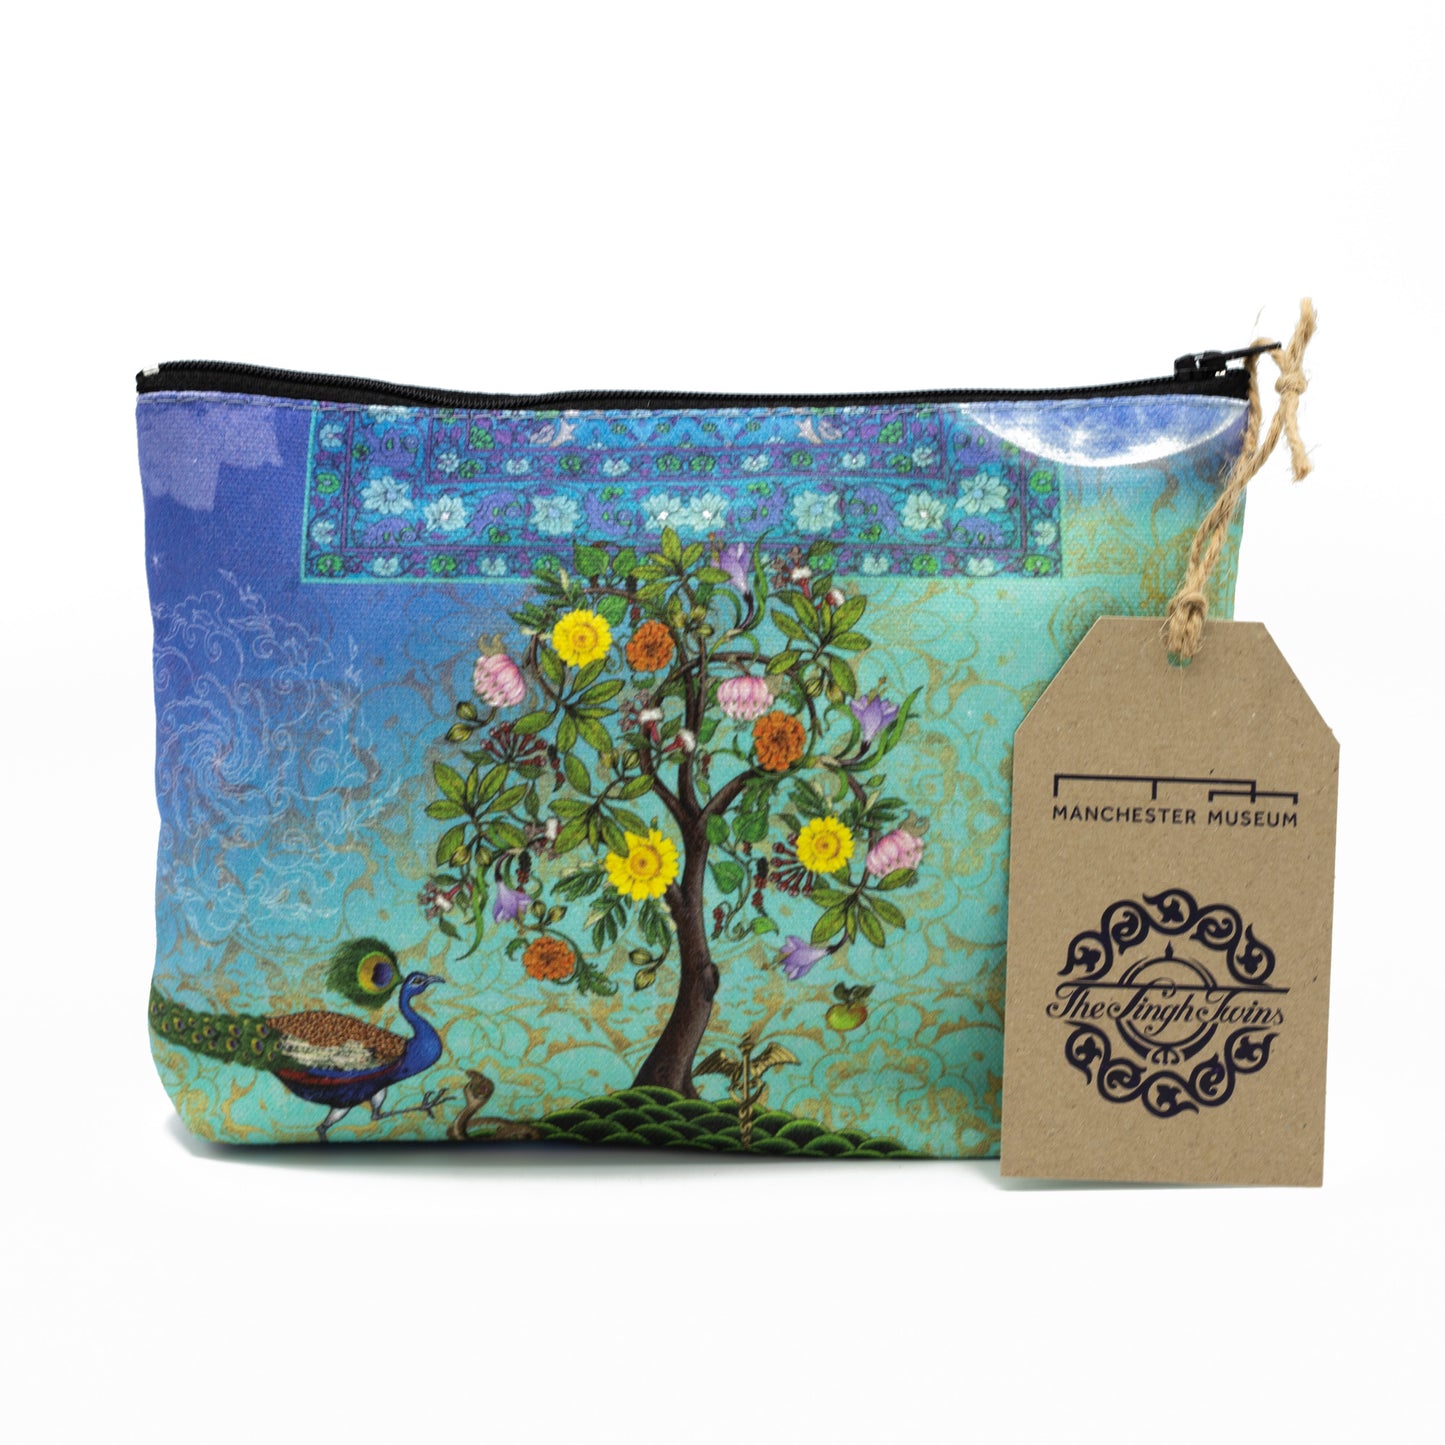 Cosmetics bag featuring The Singh Twins Knowledge Design. A tree and peacock and blue and green background. Brown Manchester Museum label